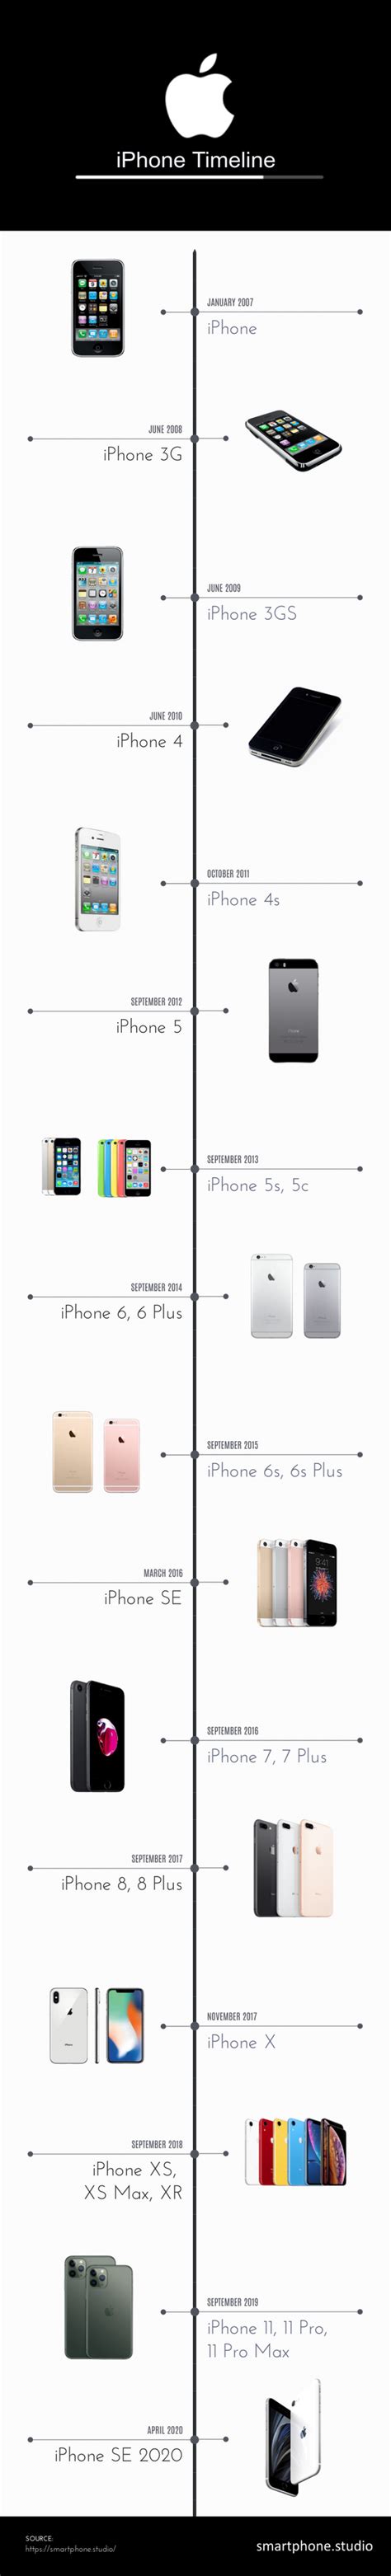 Apples Iphone Release Timeline Infographic